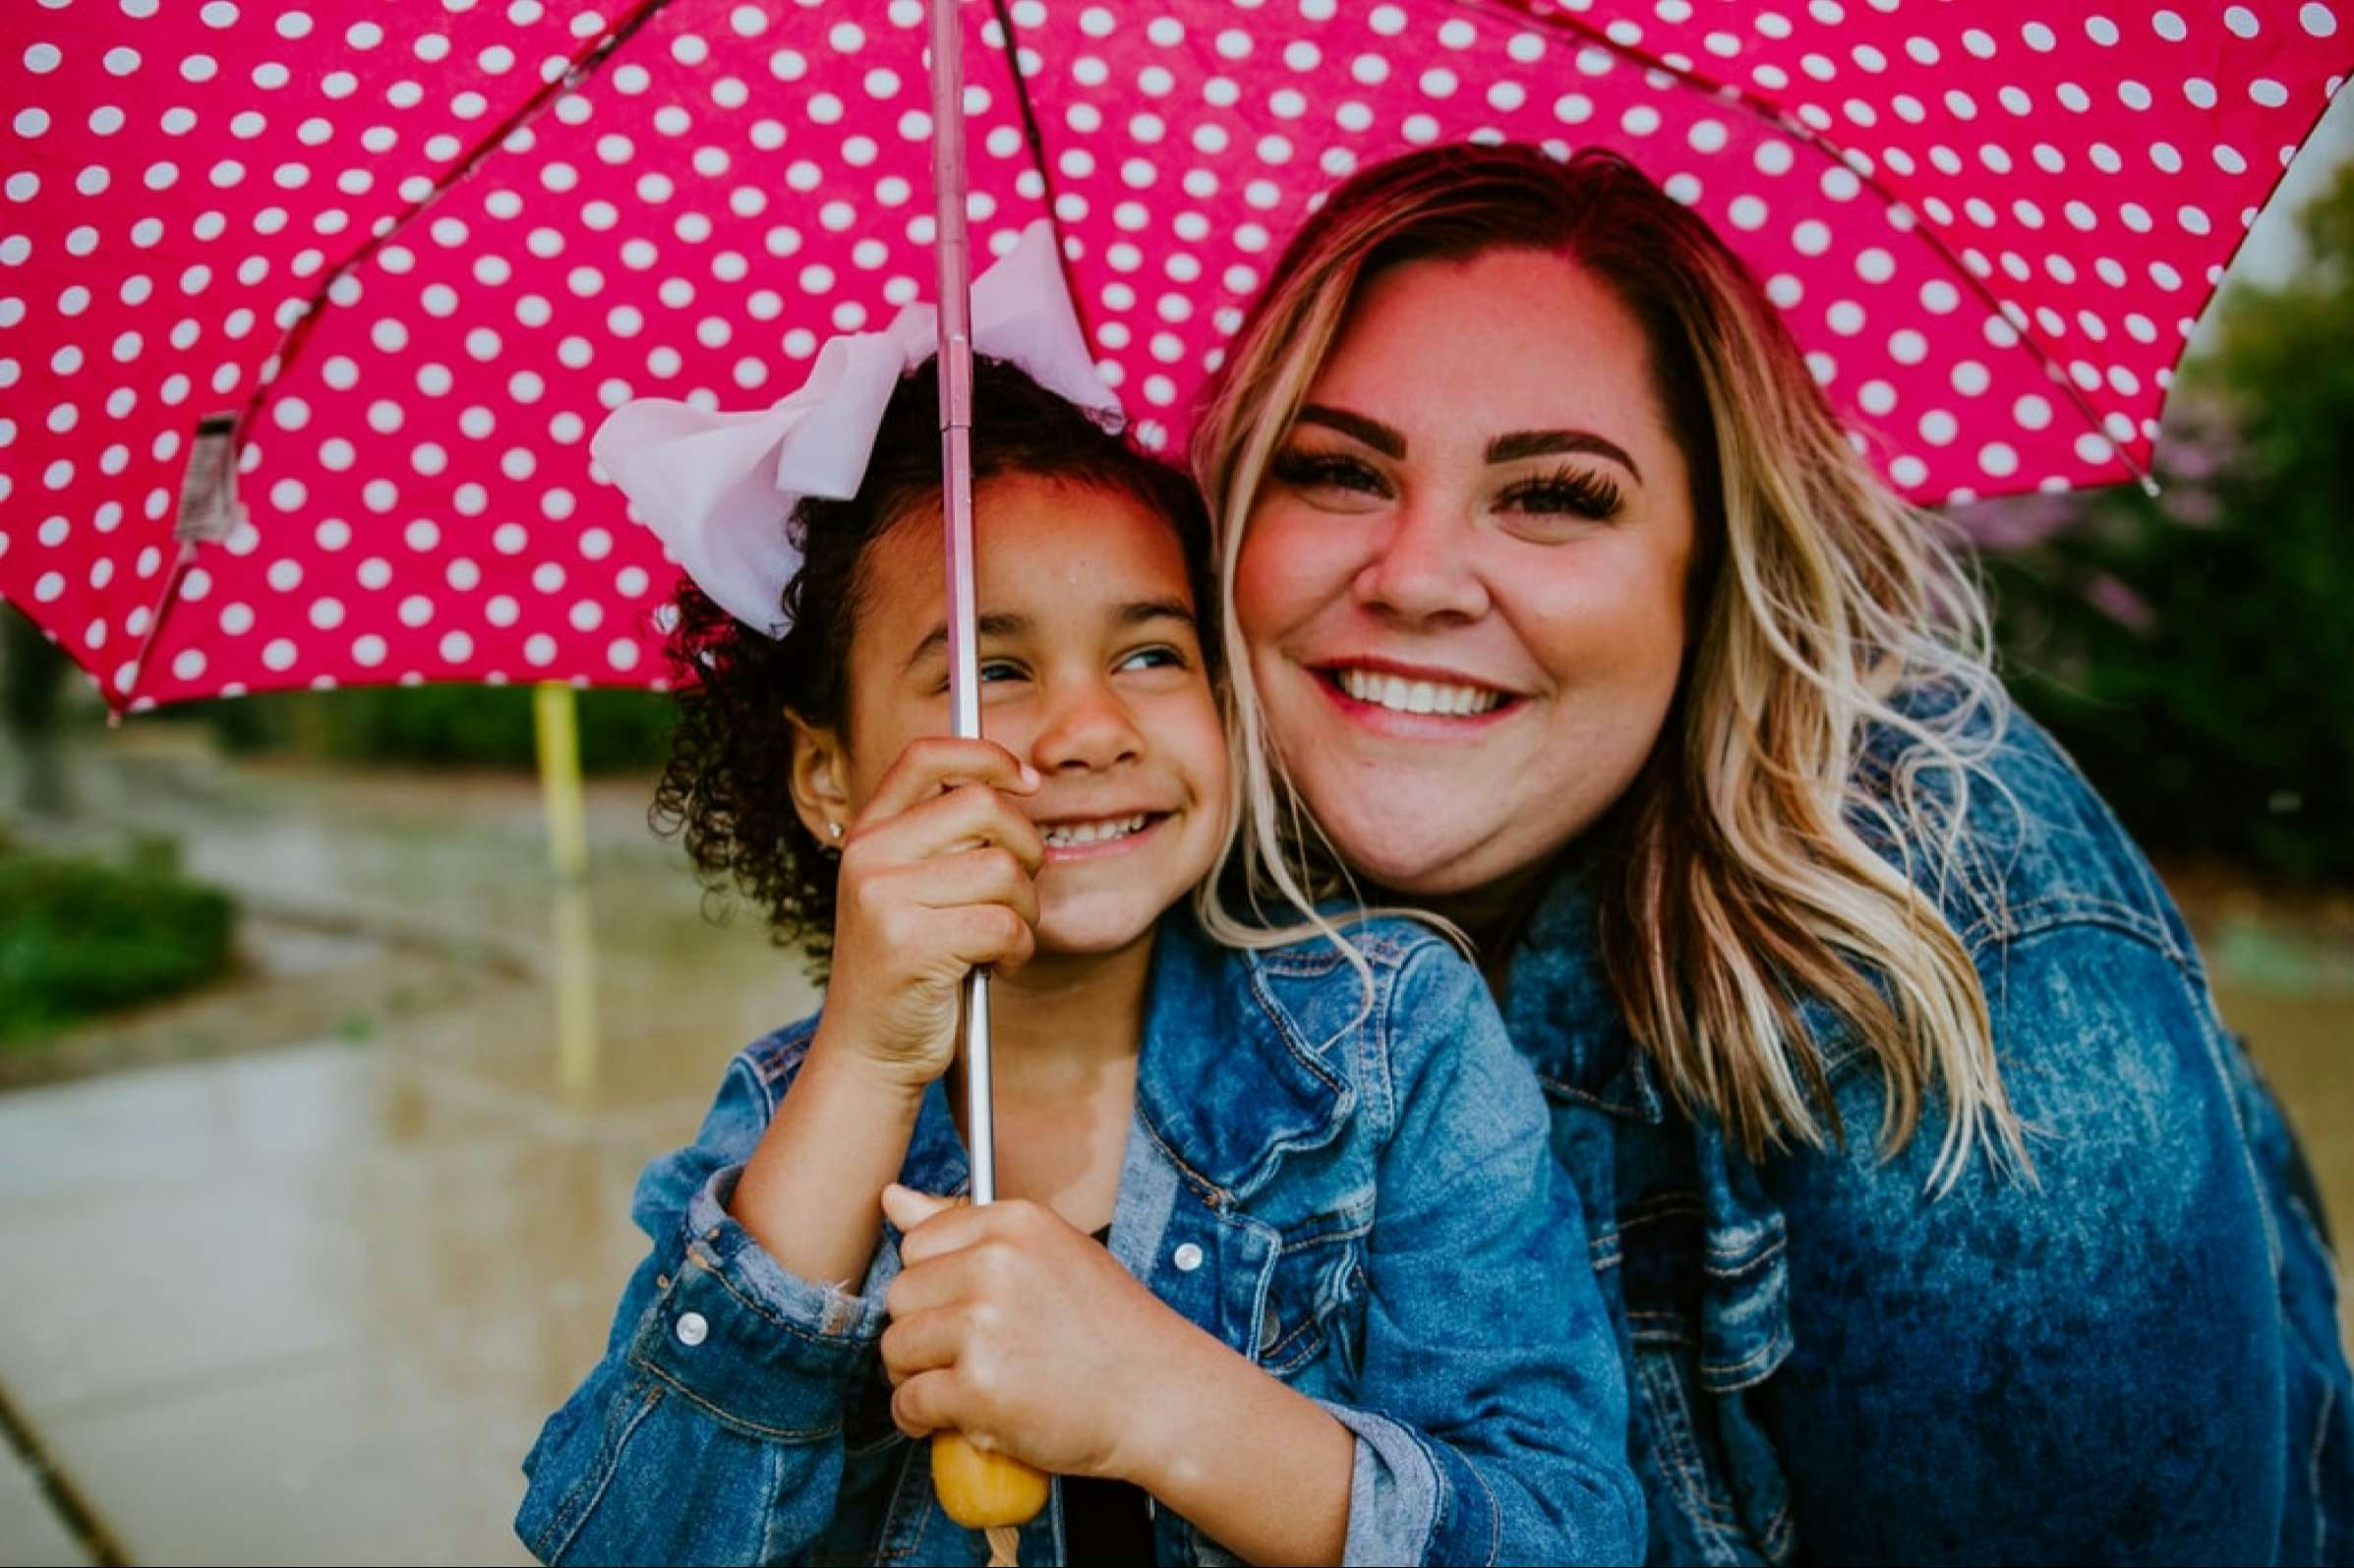 Smiling woman wearing a jean jacket beside smiling young girl holding umbrella